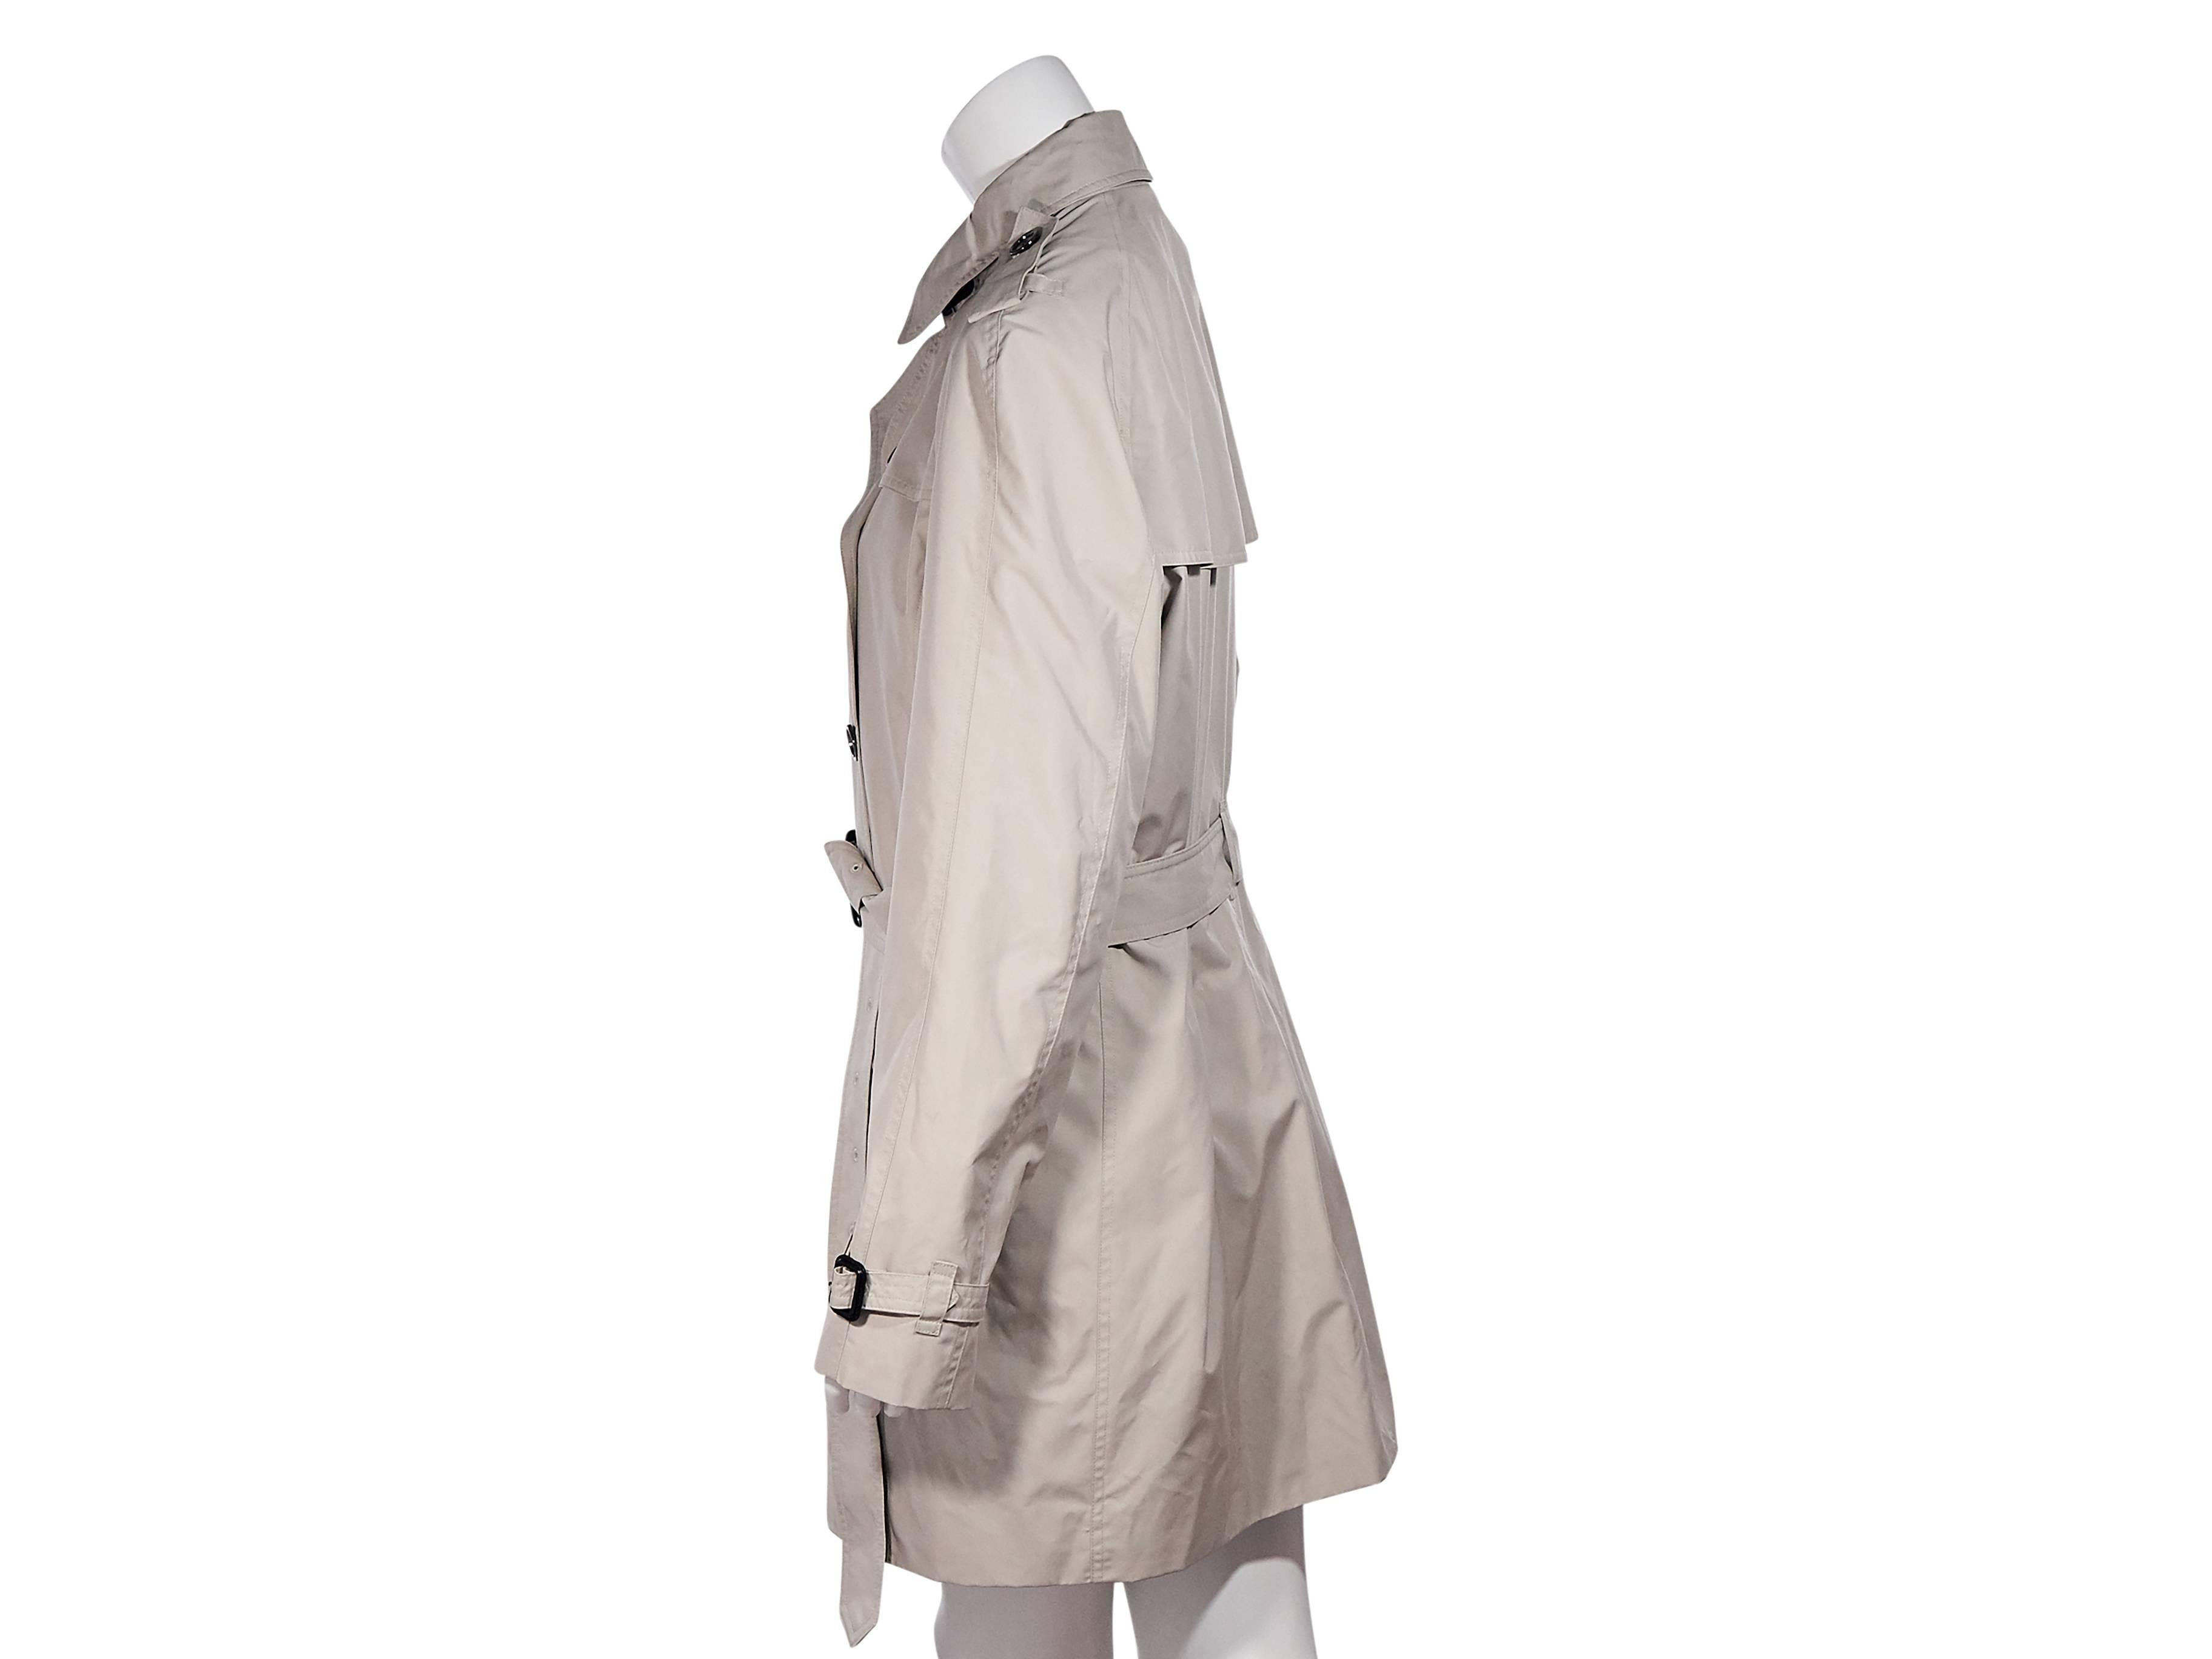 Product details: Tan cashmere trench coat by Burberry. Point collar. Shoulder epaulettes. Long sleeves. Adjustable cuff straps. Double-breasted button closure. Adjustable belted waist. Waist button pockets. Back storm vent and hem vent. 
Condition: